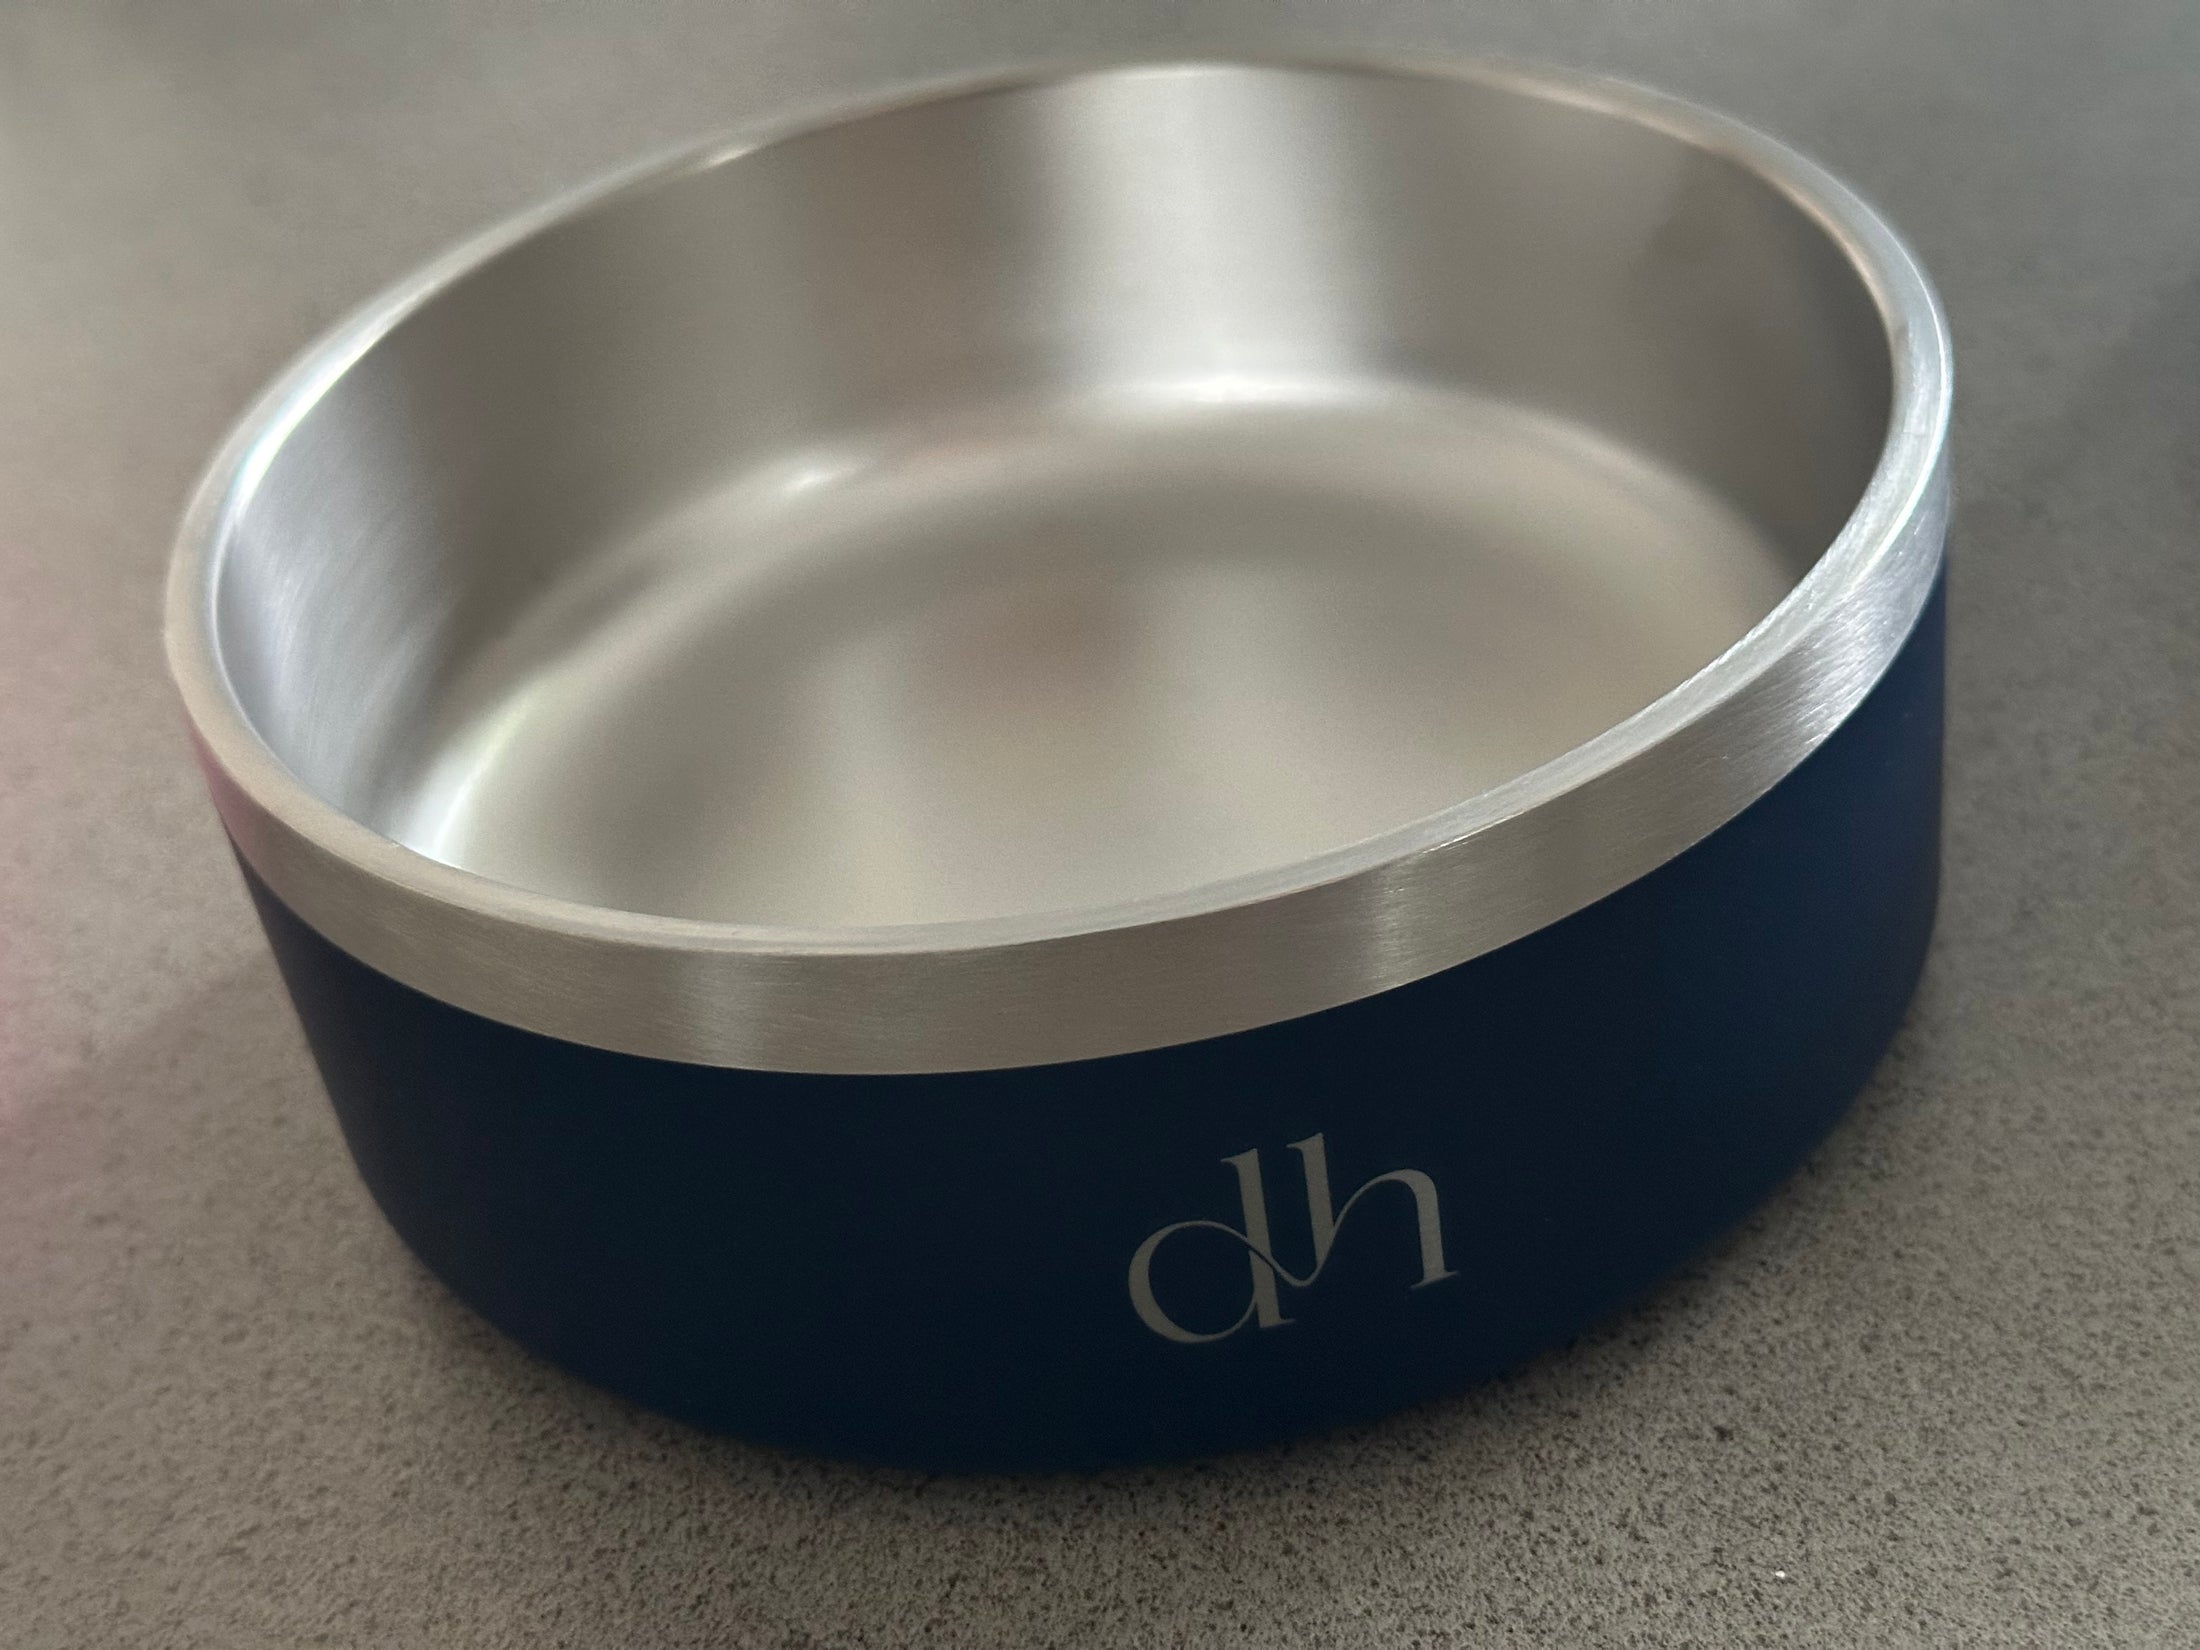 DH "YETI STYLE" Doodle Head Food/Water Bowl - Premium Stainless Steel Pet Bowl